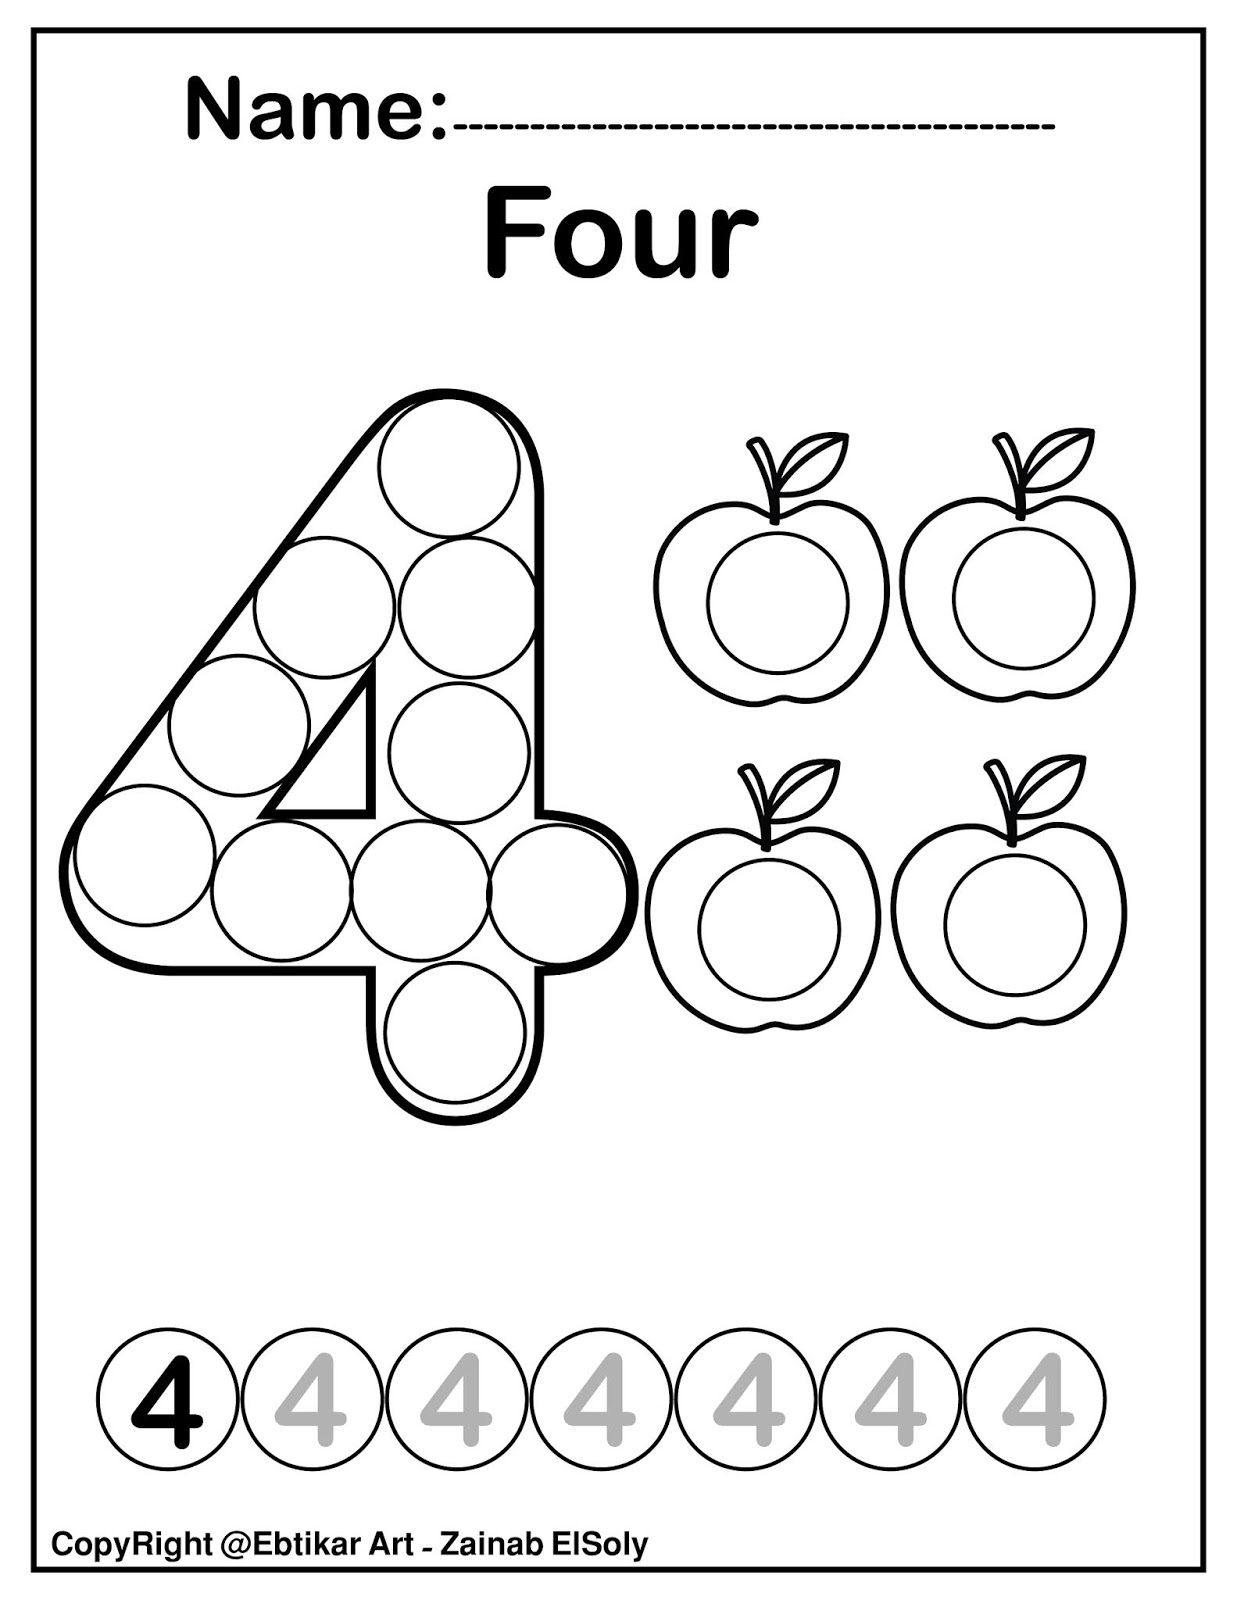 set-of-123-numbers-count-apples-dot-marker-activity-coloring-pages-for-kids-5cb